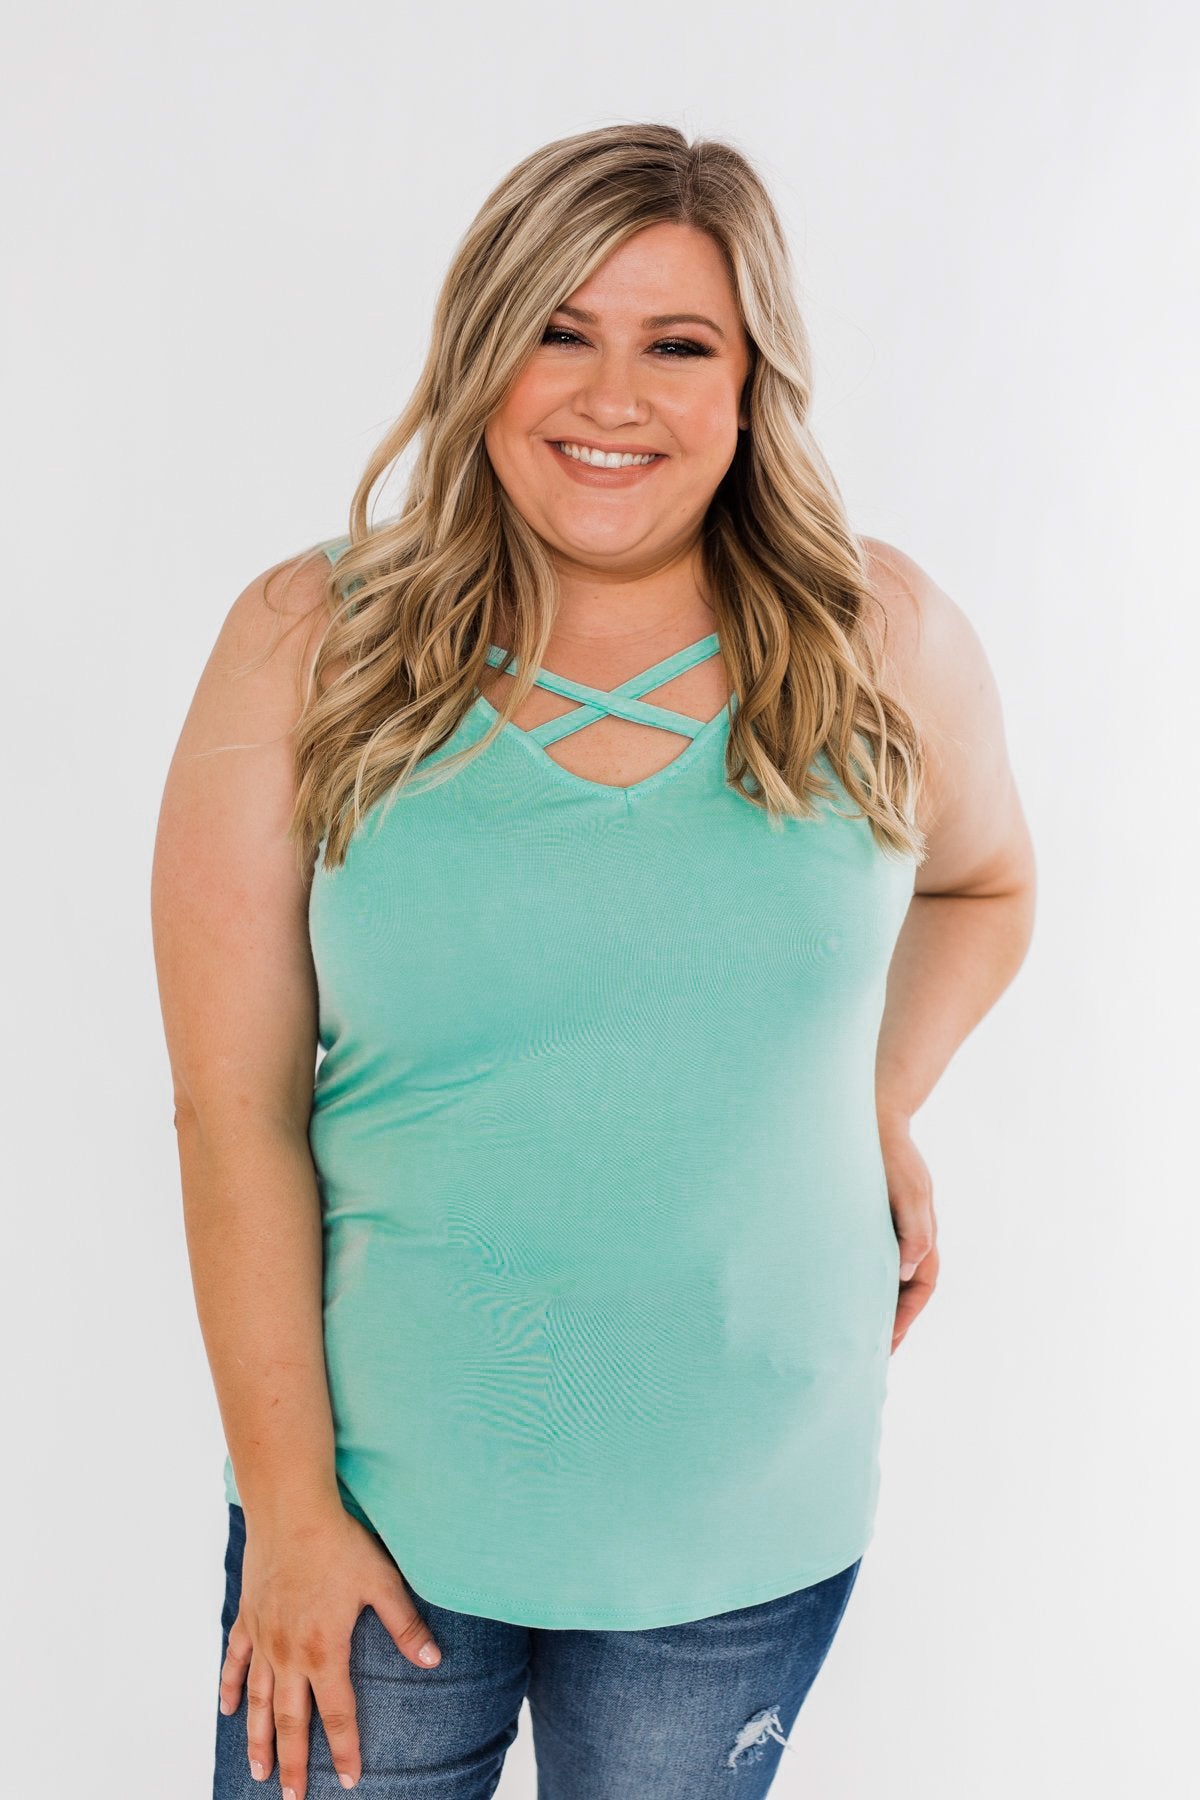 Places To Go Criss Cross Tank Top- Mint Blue